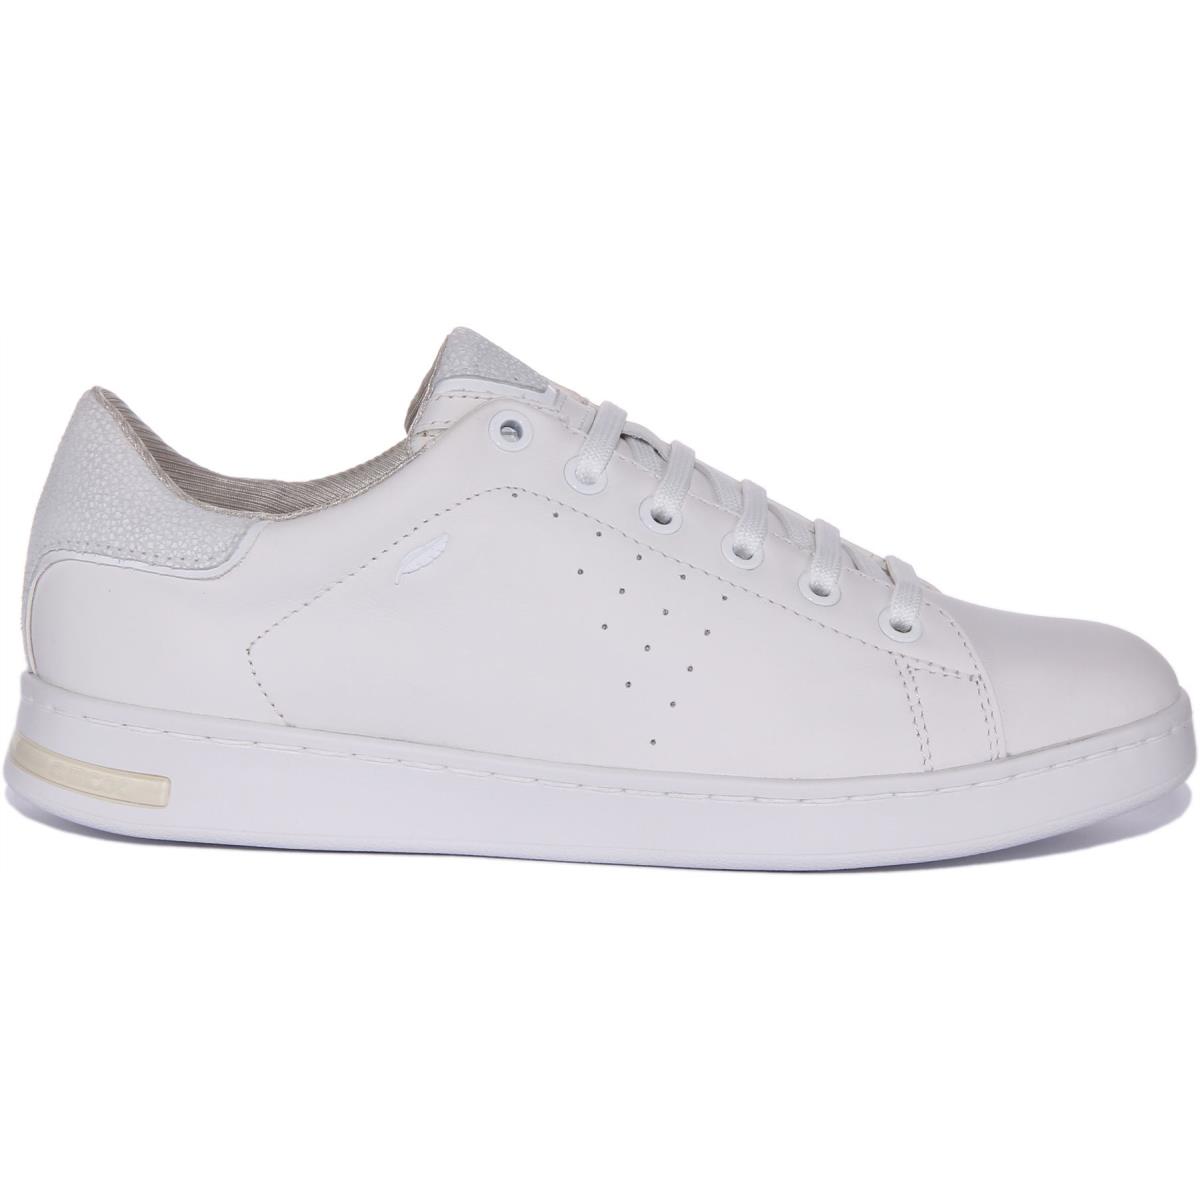 Geox D Jaysen Low Profile Casual Leather Shoes White Womens US 5 - 10